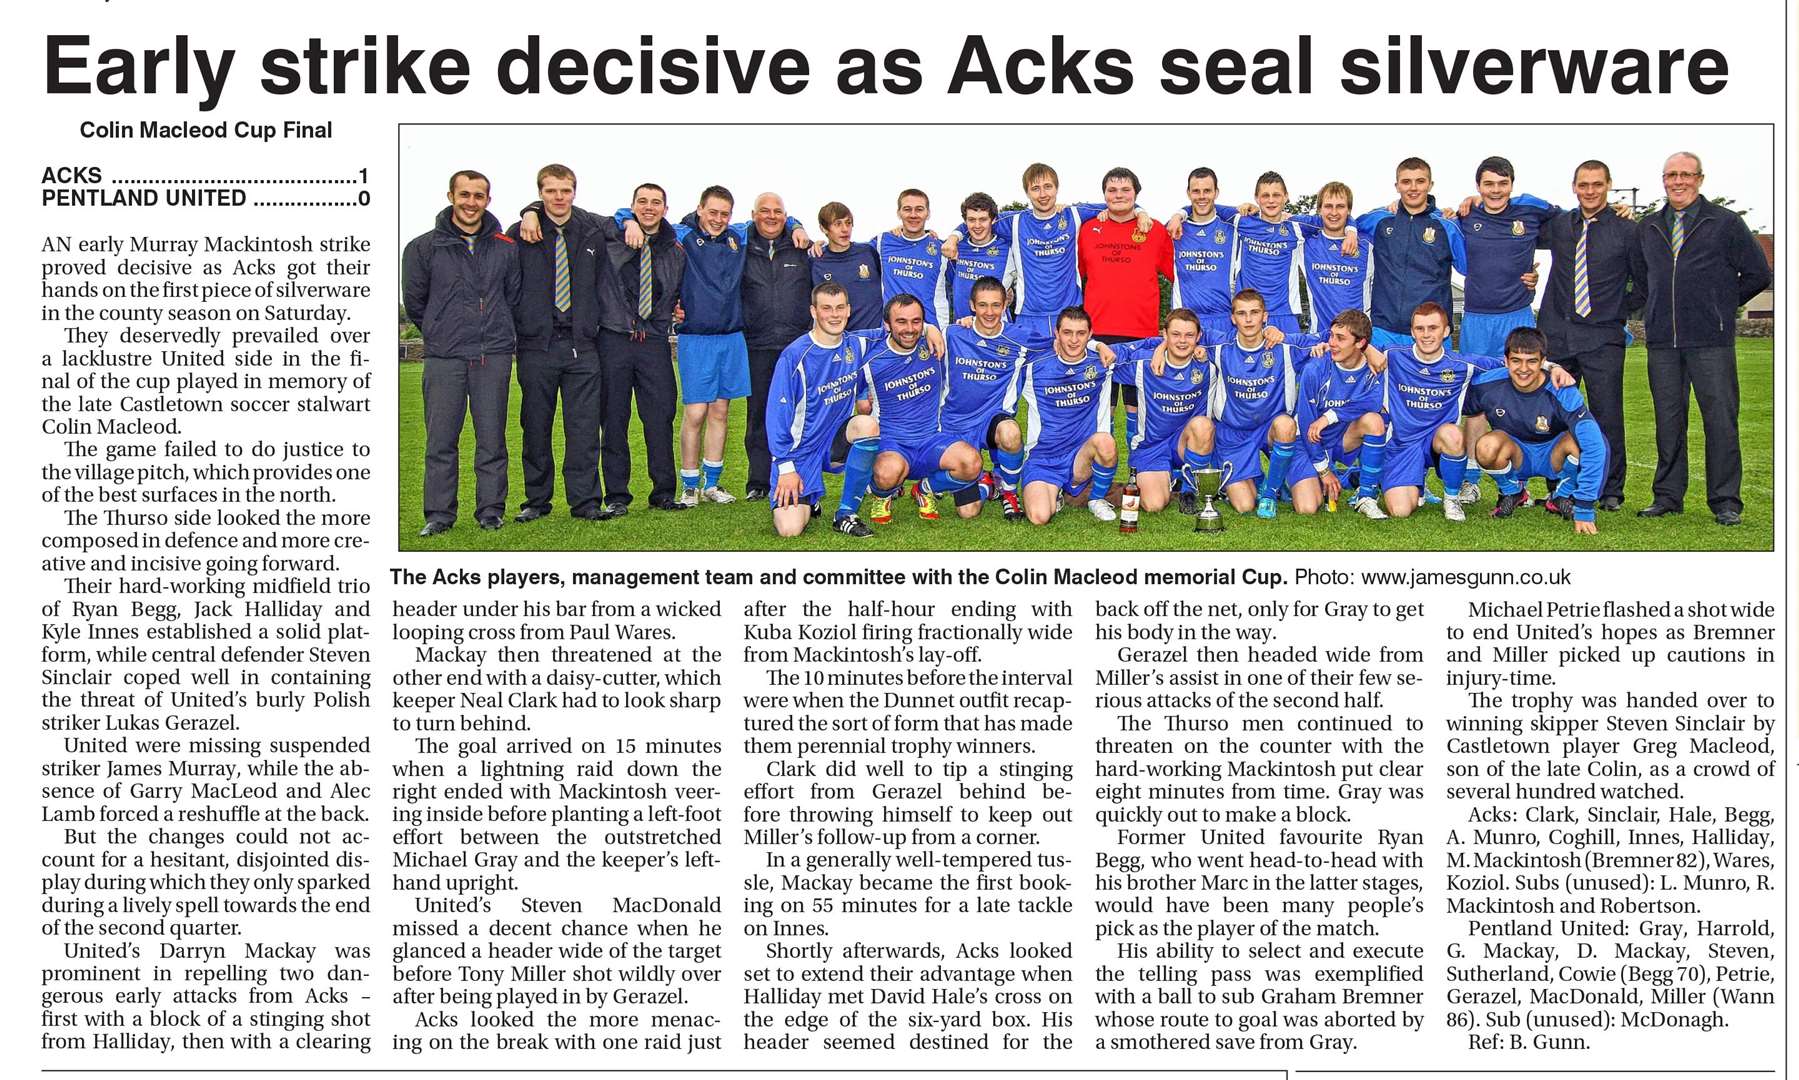 The John O'Groat Journal's report of the 2012 final when Acks defeated Pentland United.